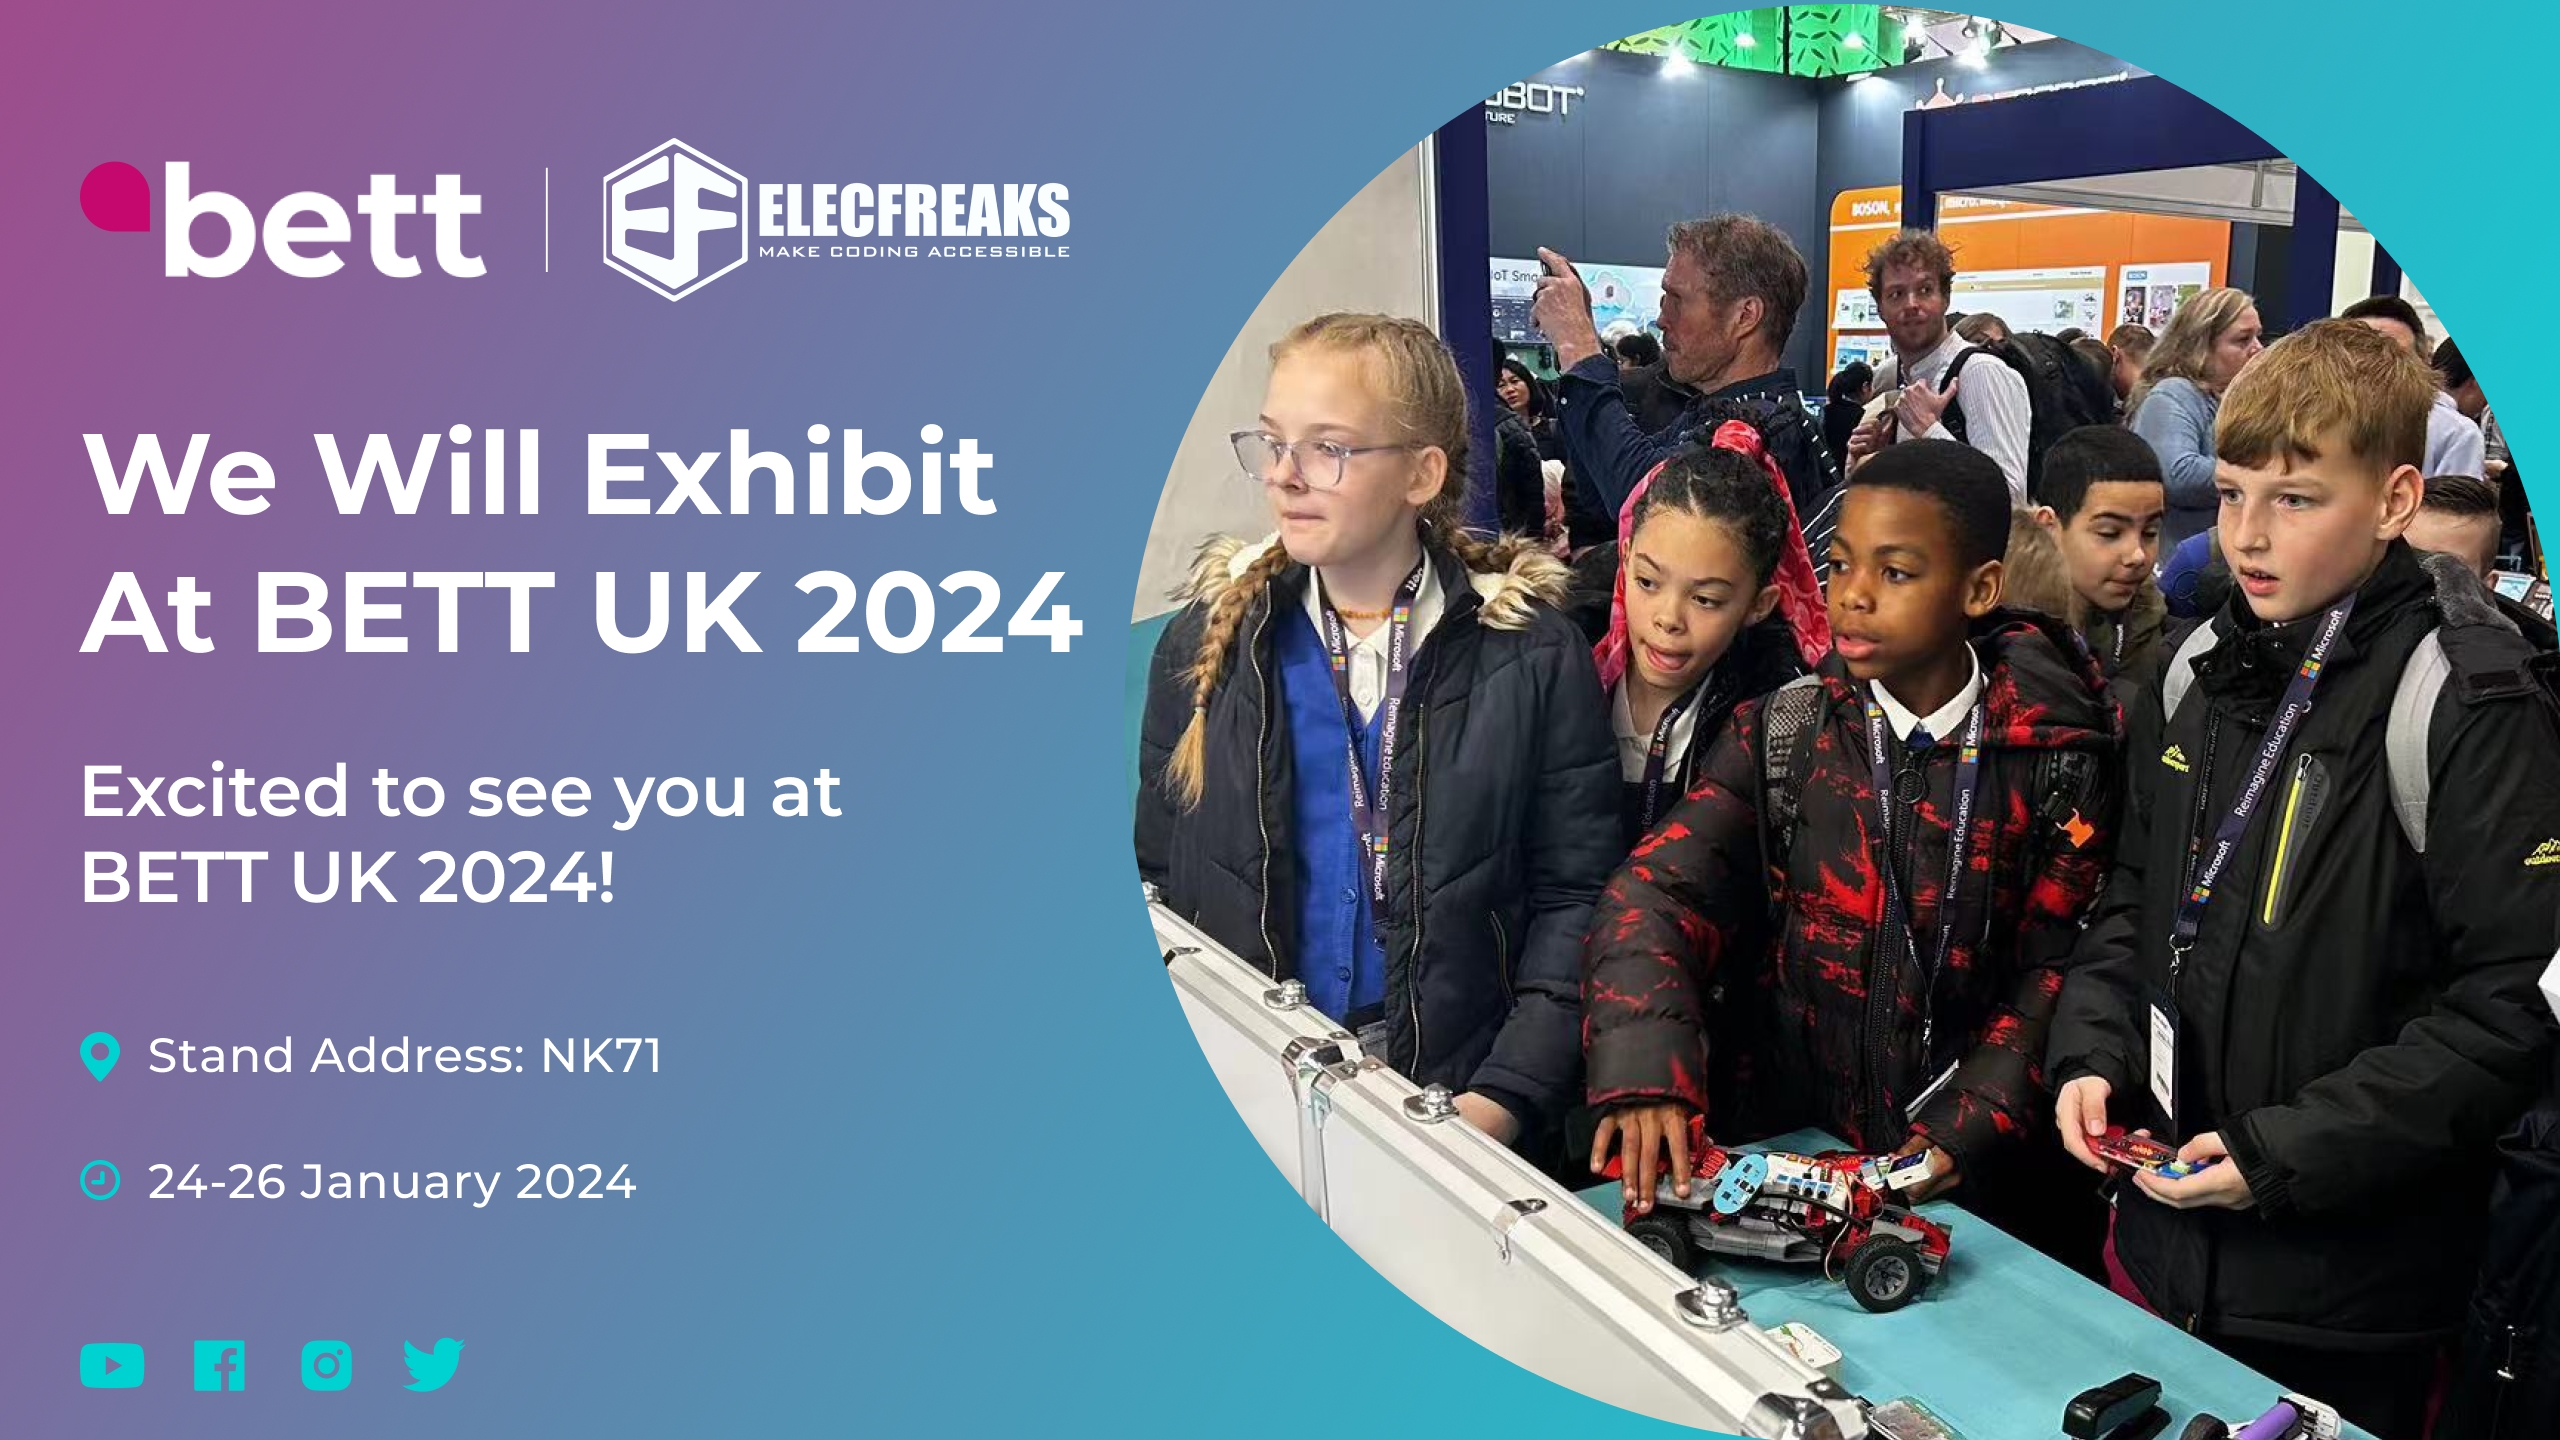 ELECFREAKS will participate in the BETT exhibition in the UK from January 24th to 26th